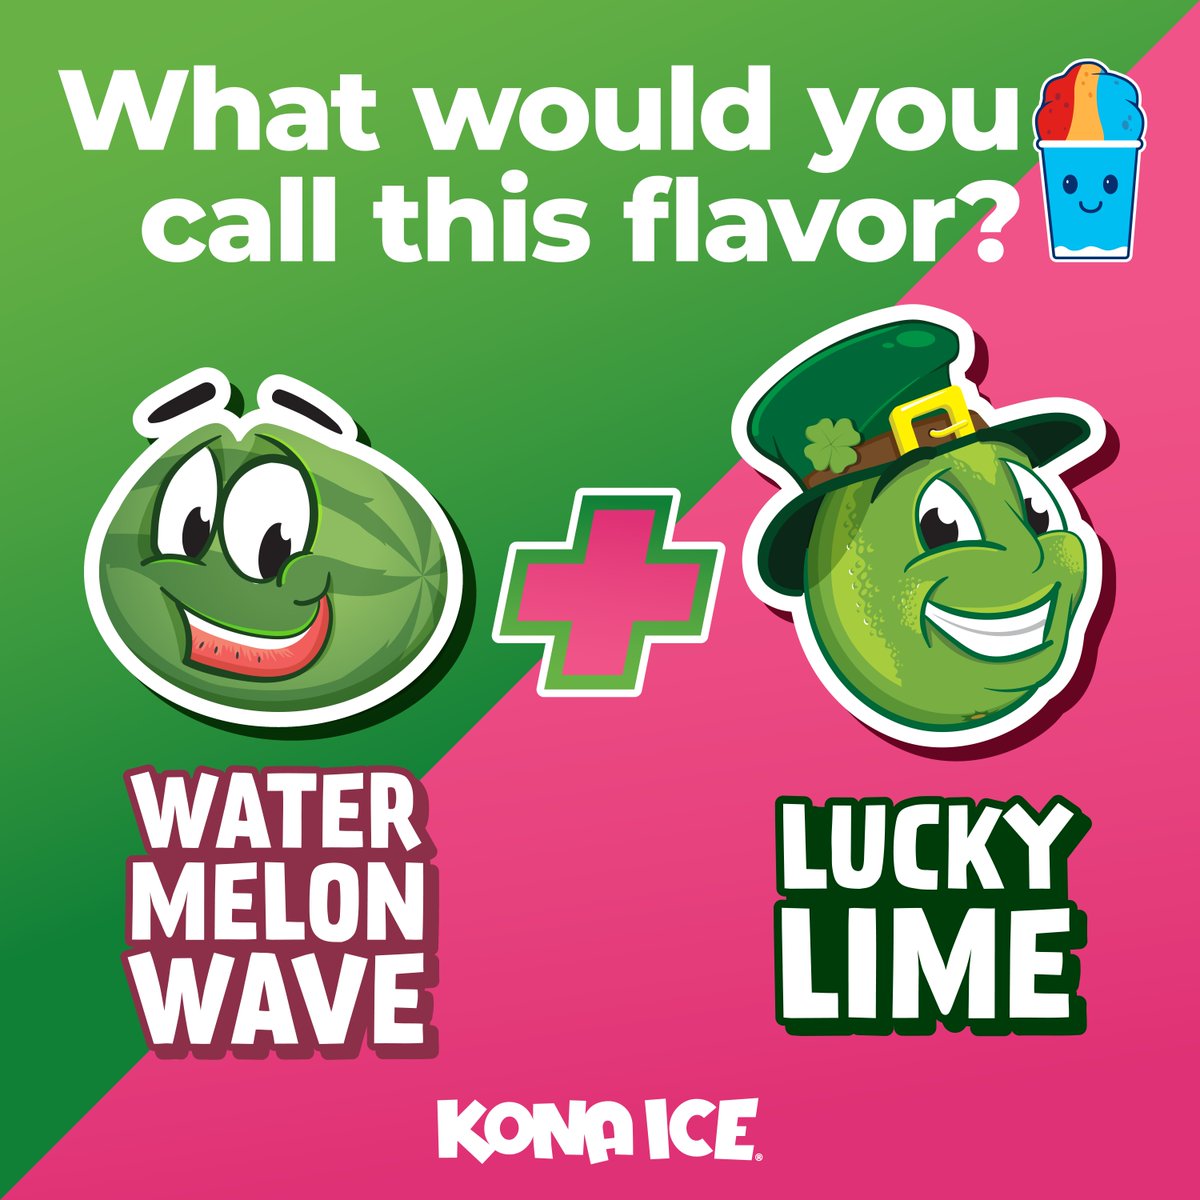 We need your help once again to name this flavor Kombo! Ready, set, go! 👇🍧